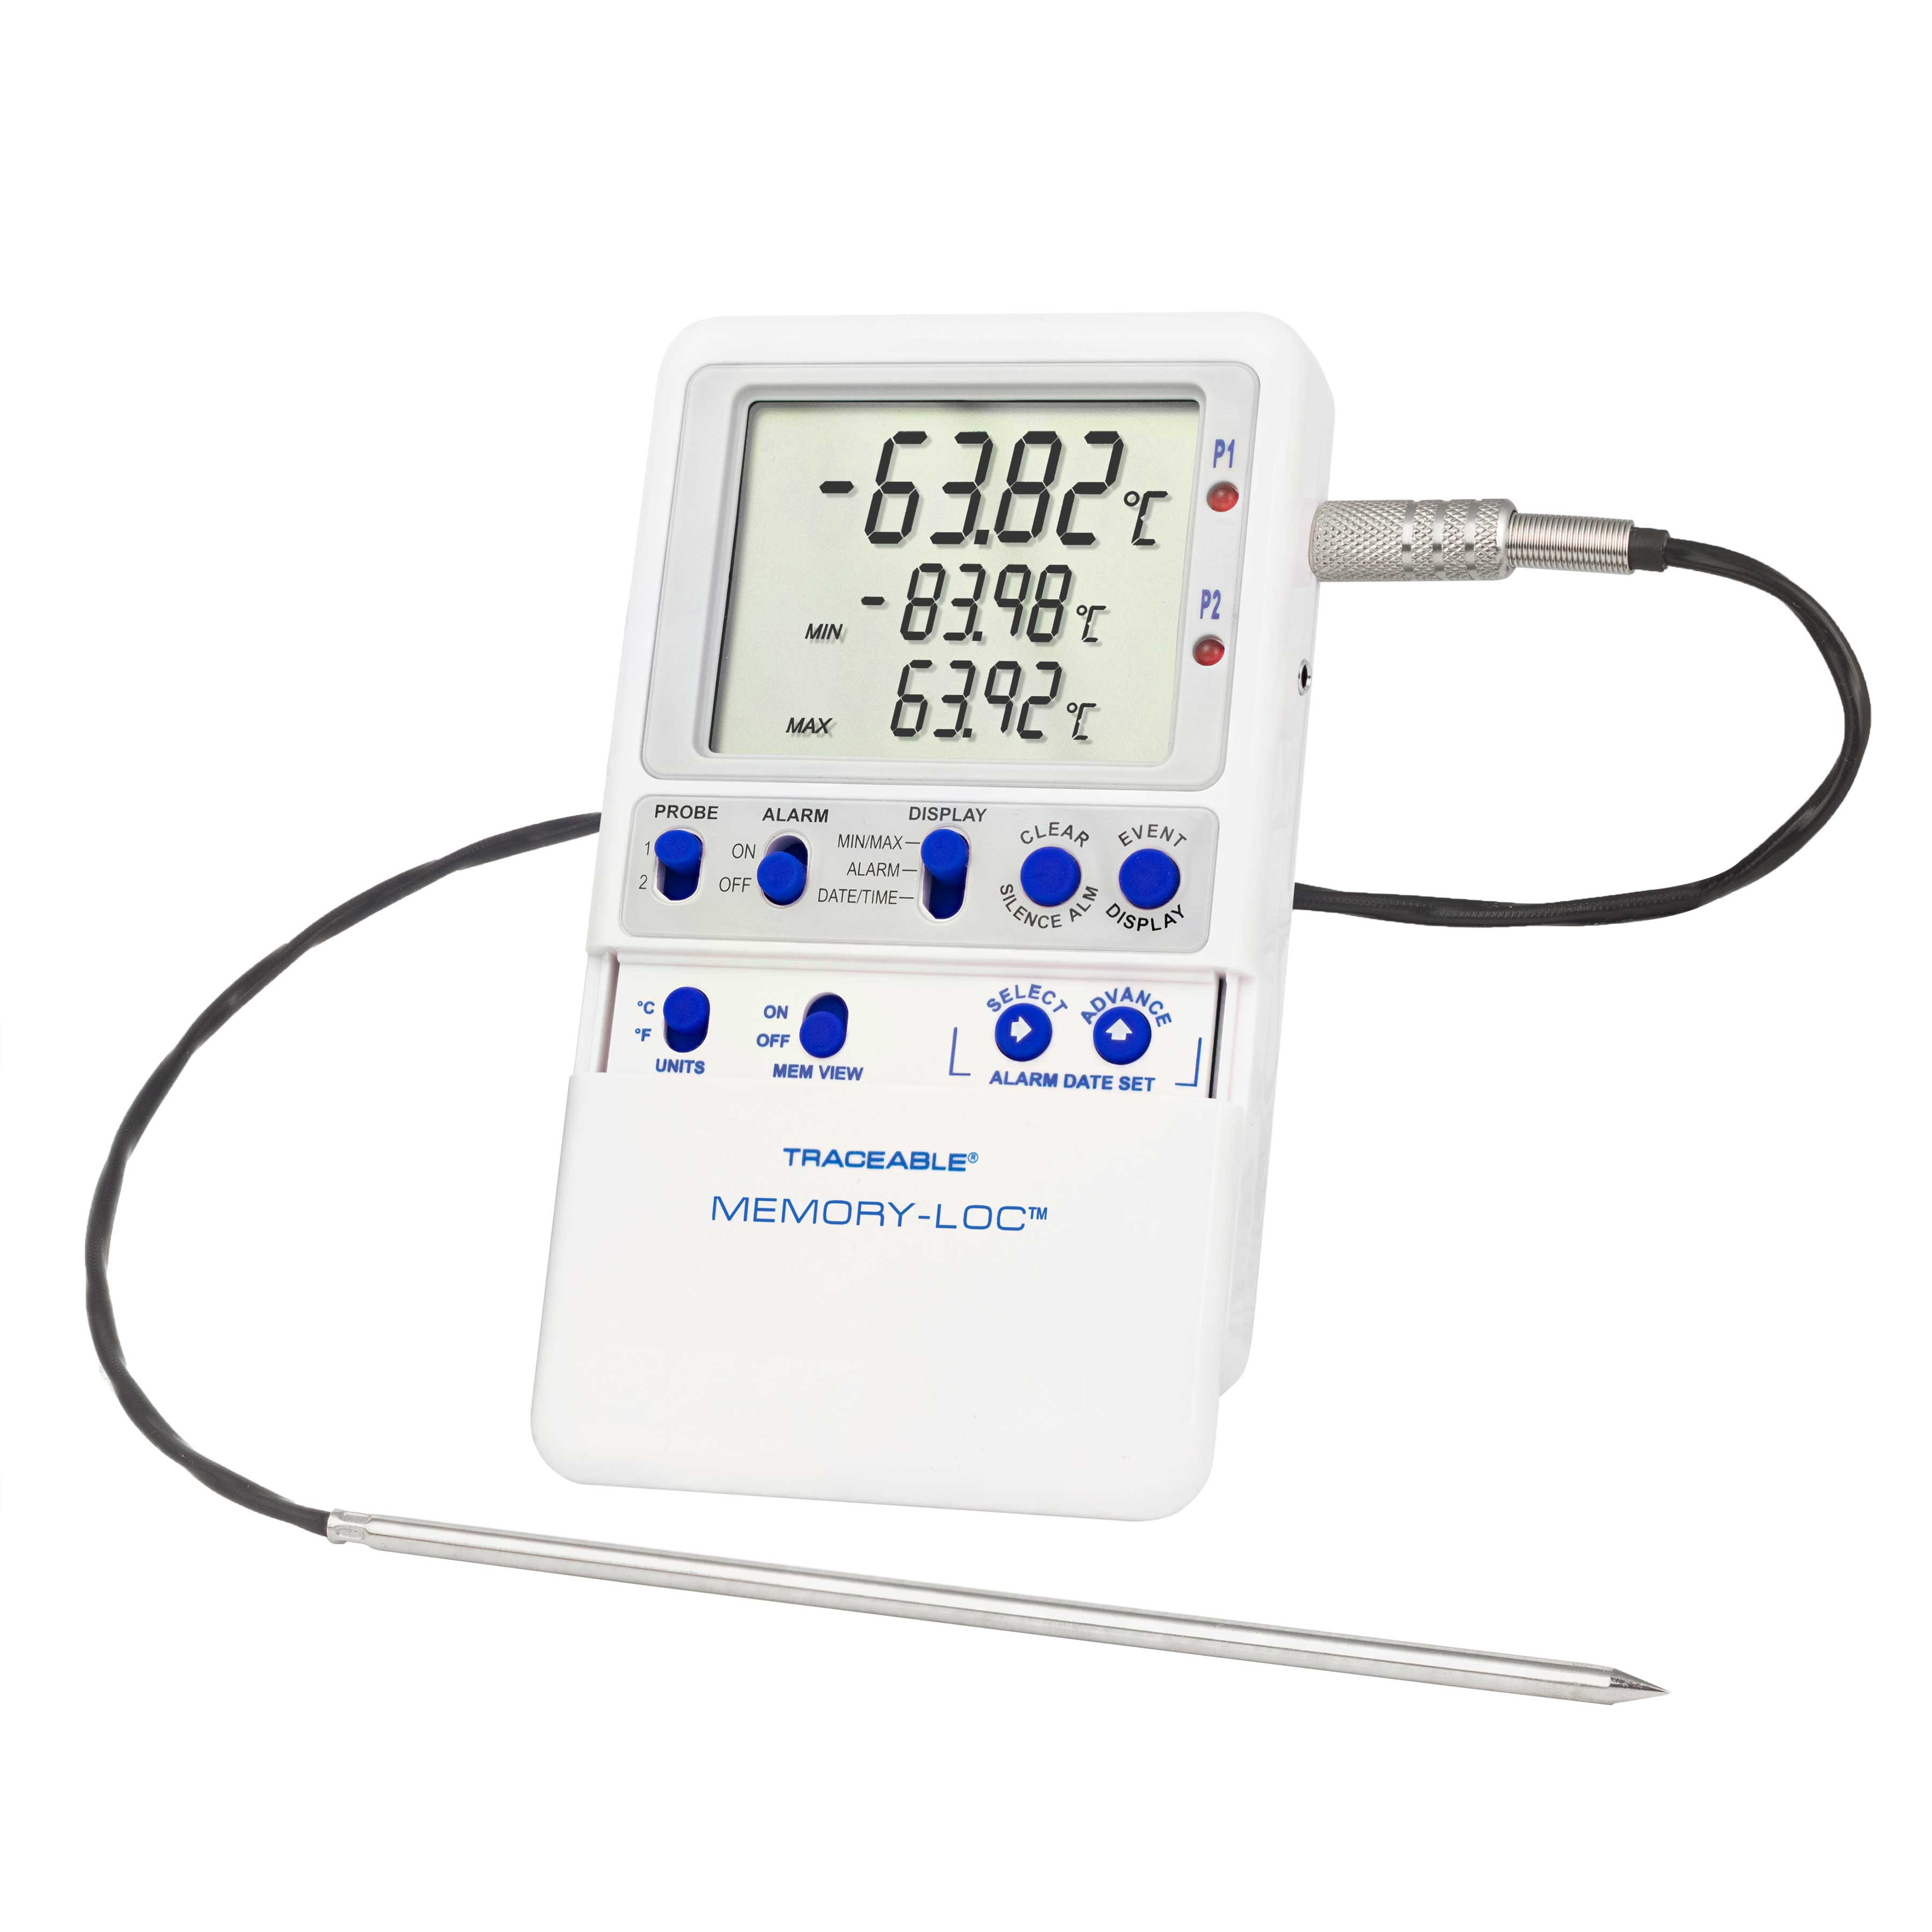 Memory-Loc datalogging digital thermometer. TRACEABLE. Range: –90.00 to 105.00°C. Accuracy: ±0.2°C. Resolution: 0.01°C. Probes: Platinum RTD sensors, 1 stainless-steel 316 Probe. Application: Ultra-freezers